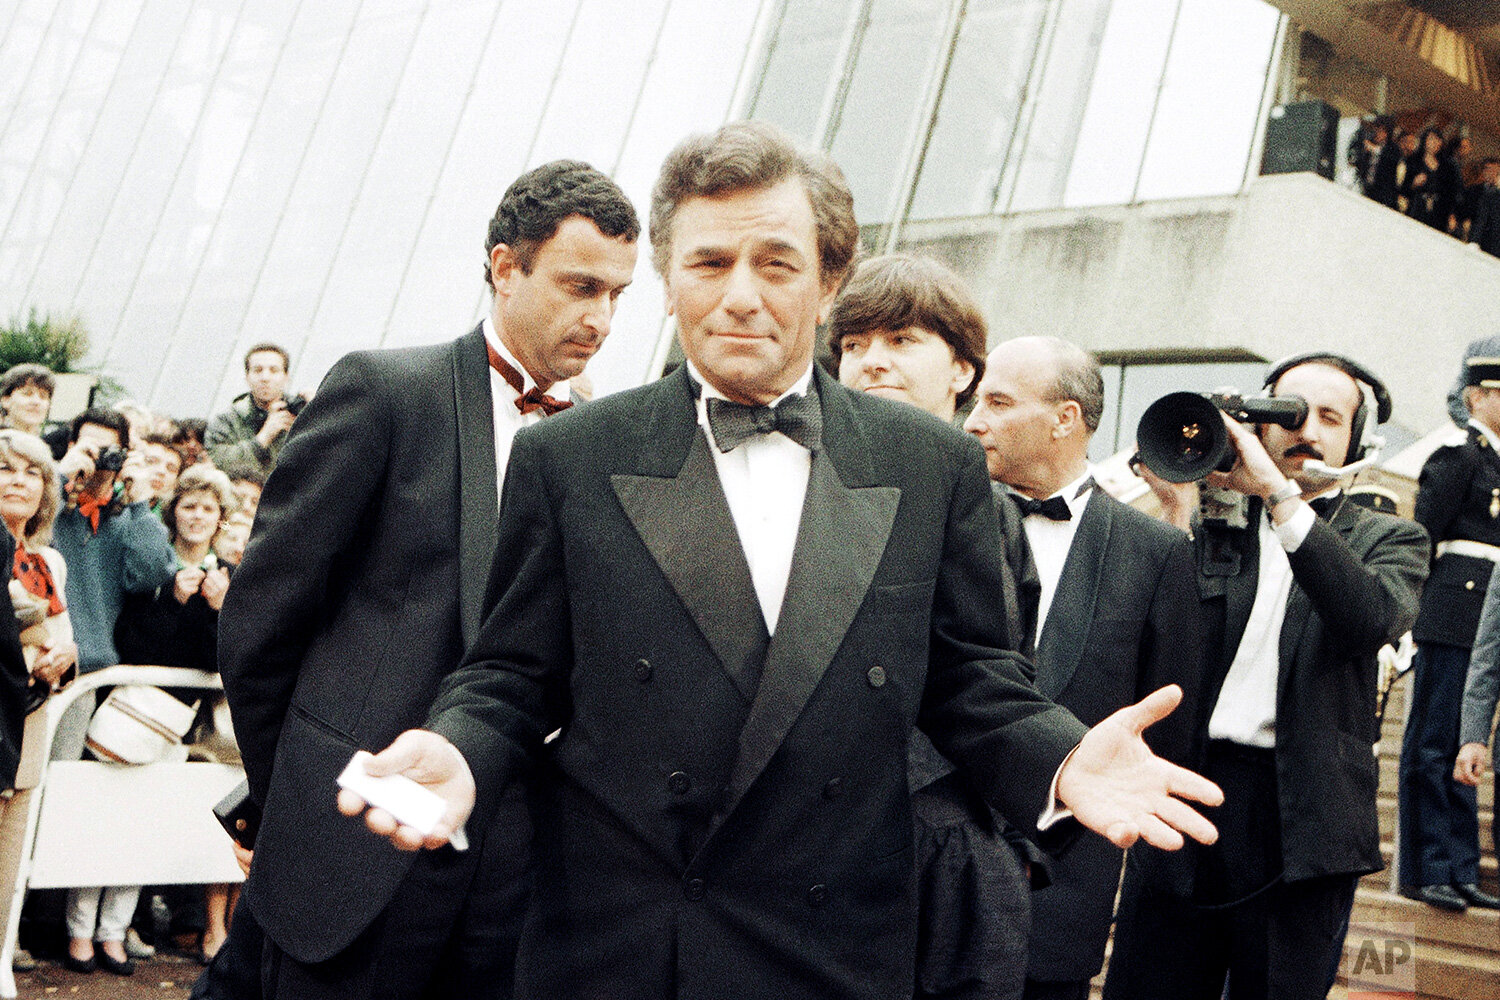  US actor Peter Falk gestures at the 27th International Film Festival, on May 18, 1974, in Cannes, France. (AP Photo/Jean-Jacques Levy) 